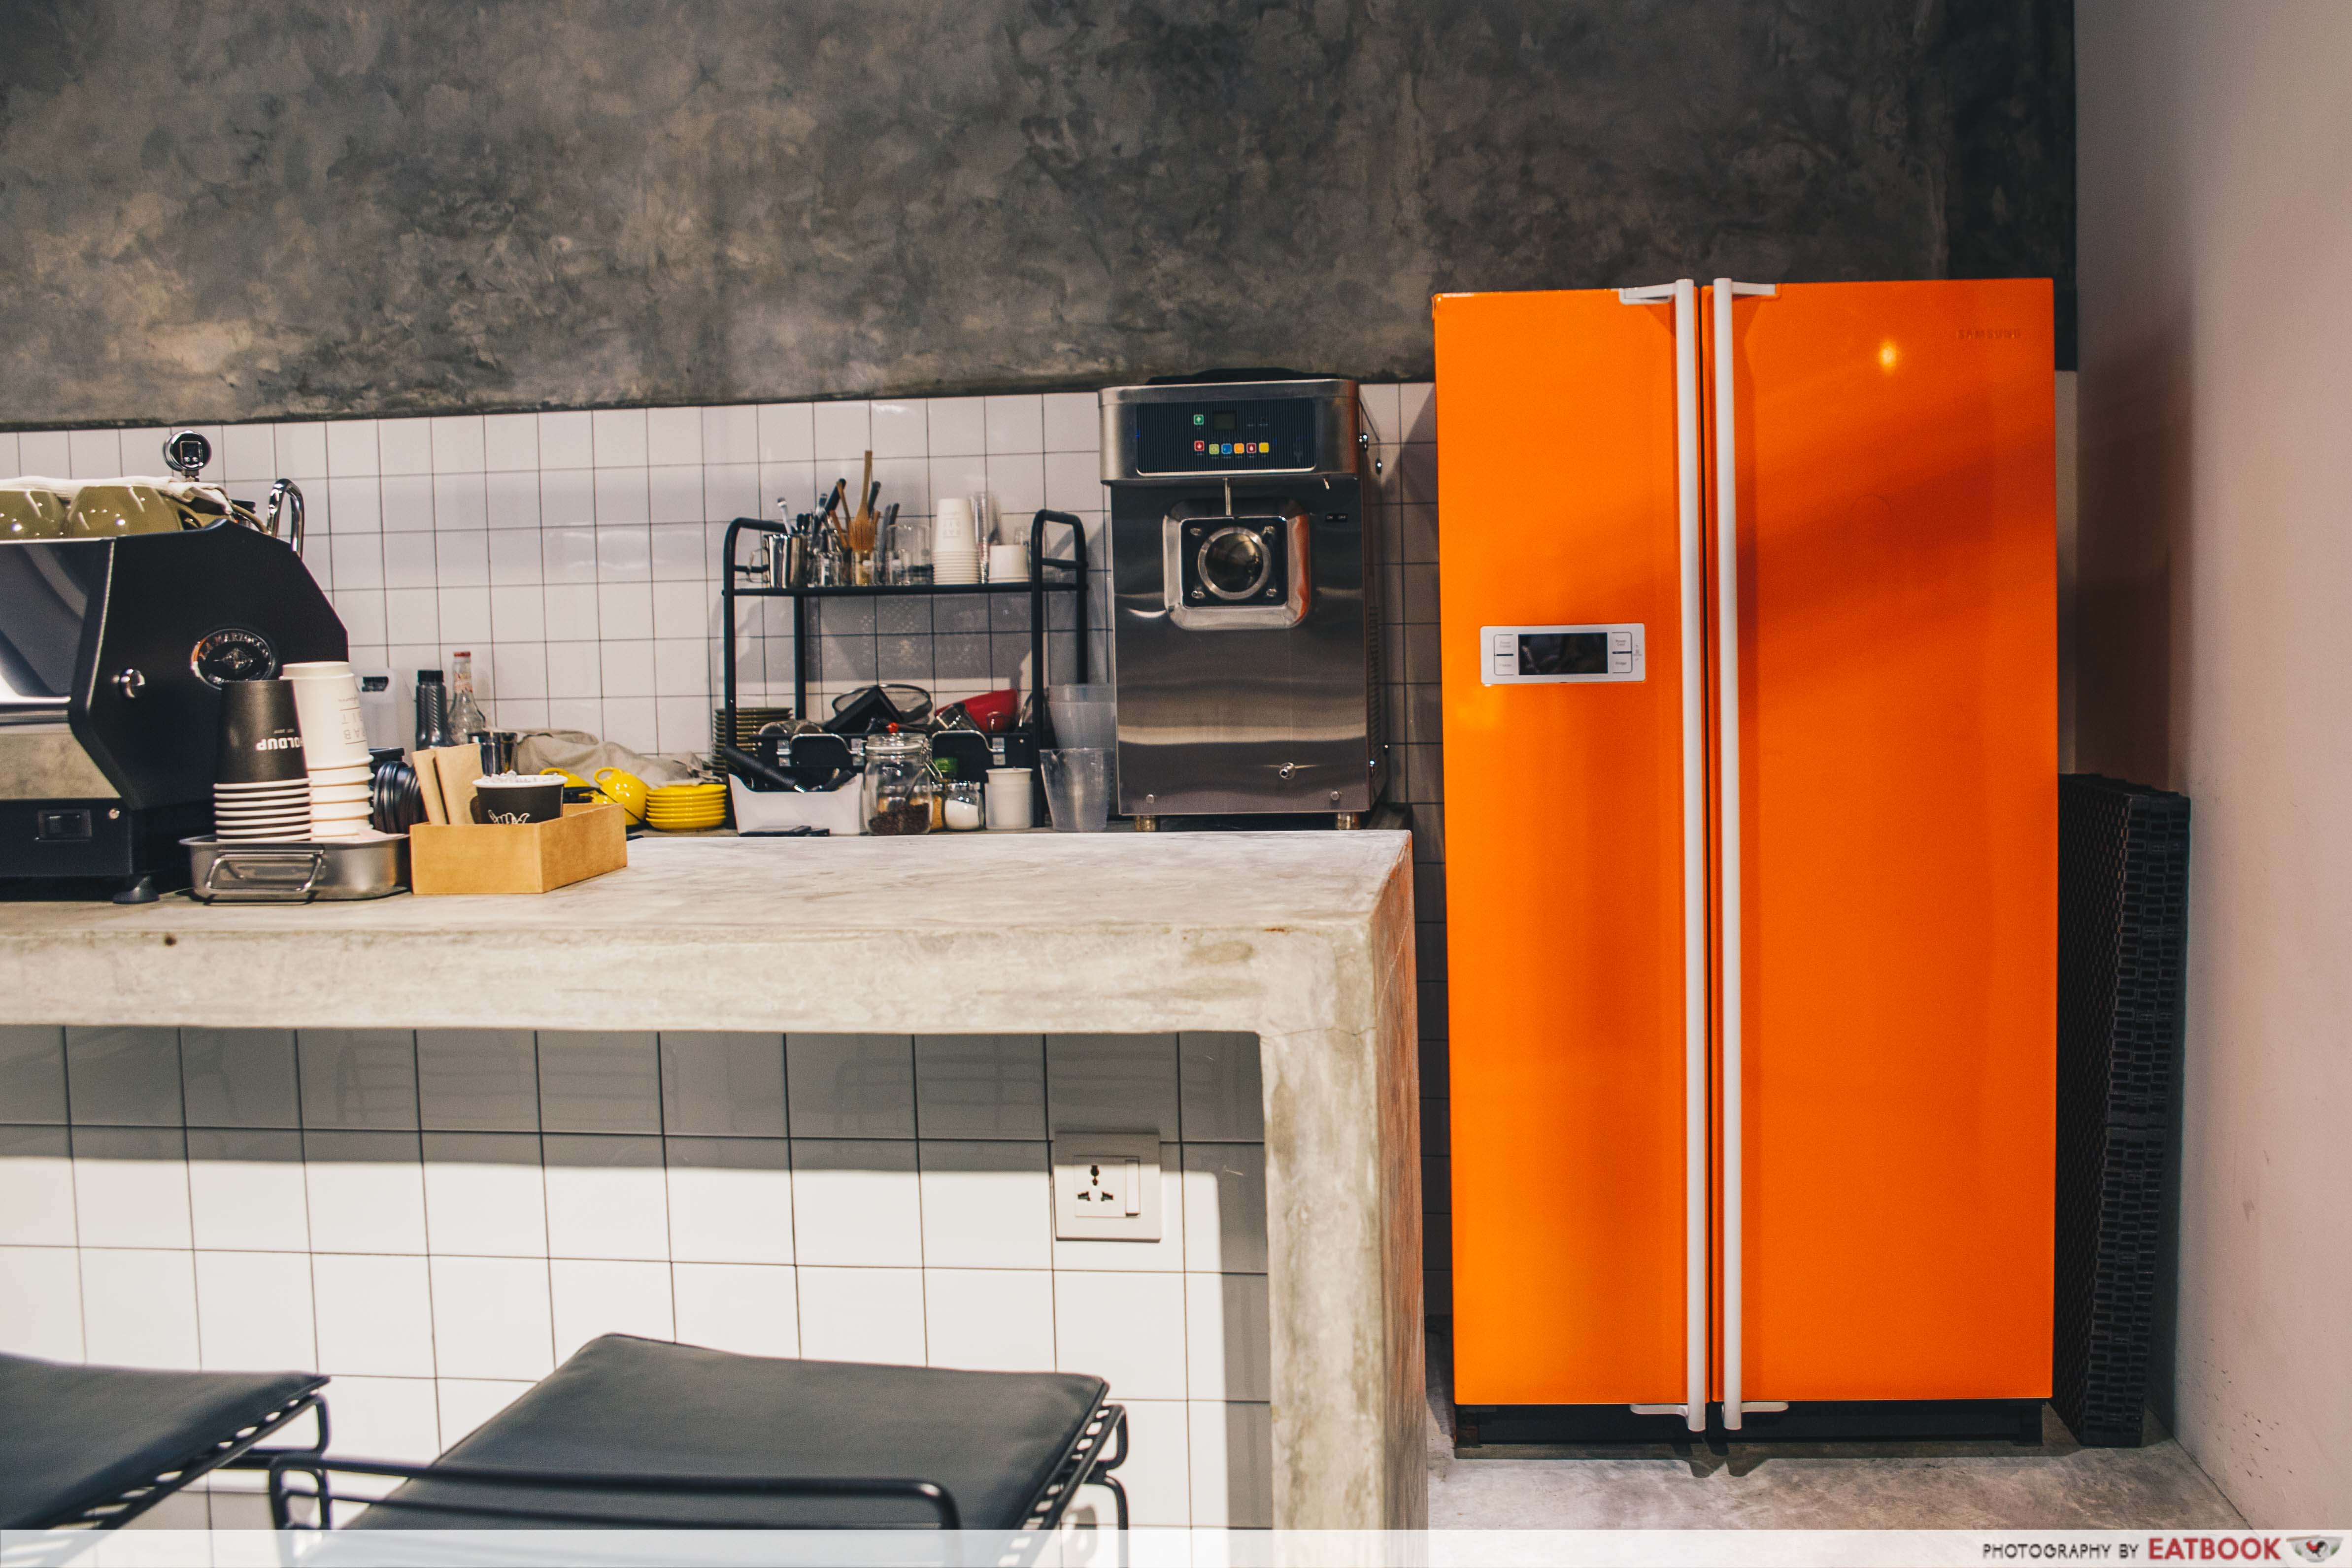 Cafes in Penang - Out of Nowhere Orange Fridge